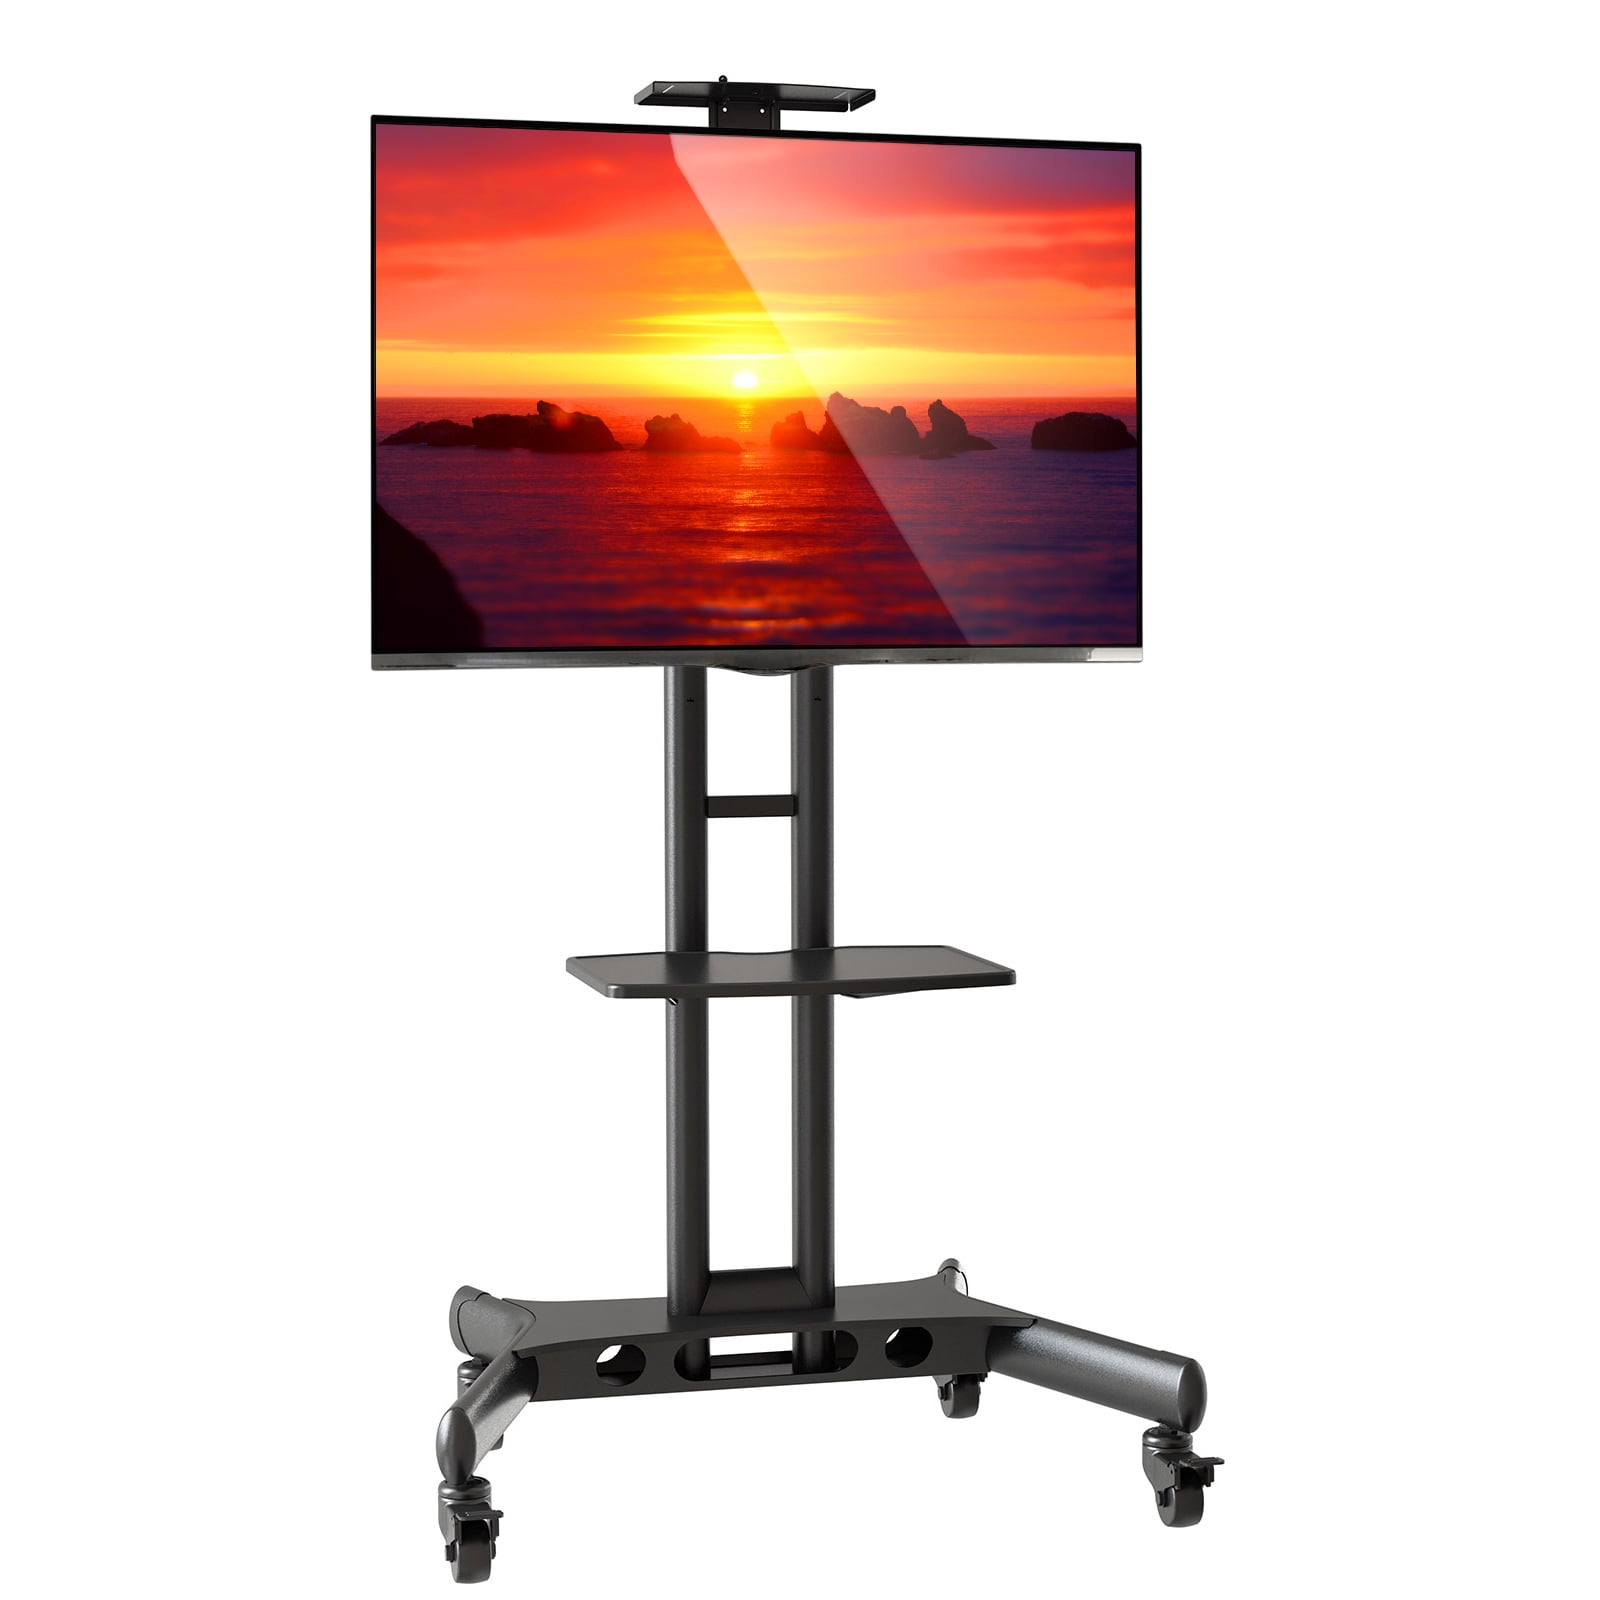 Wholesale 17 Inch Samsung LCD Tv With Stylish And Sleek Features 